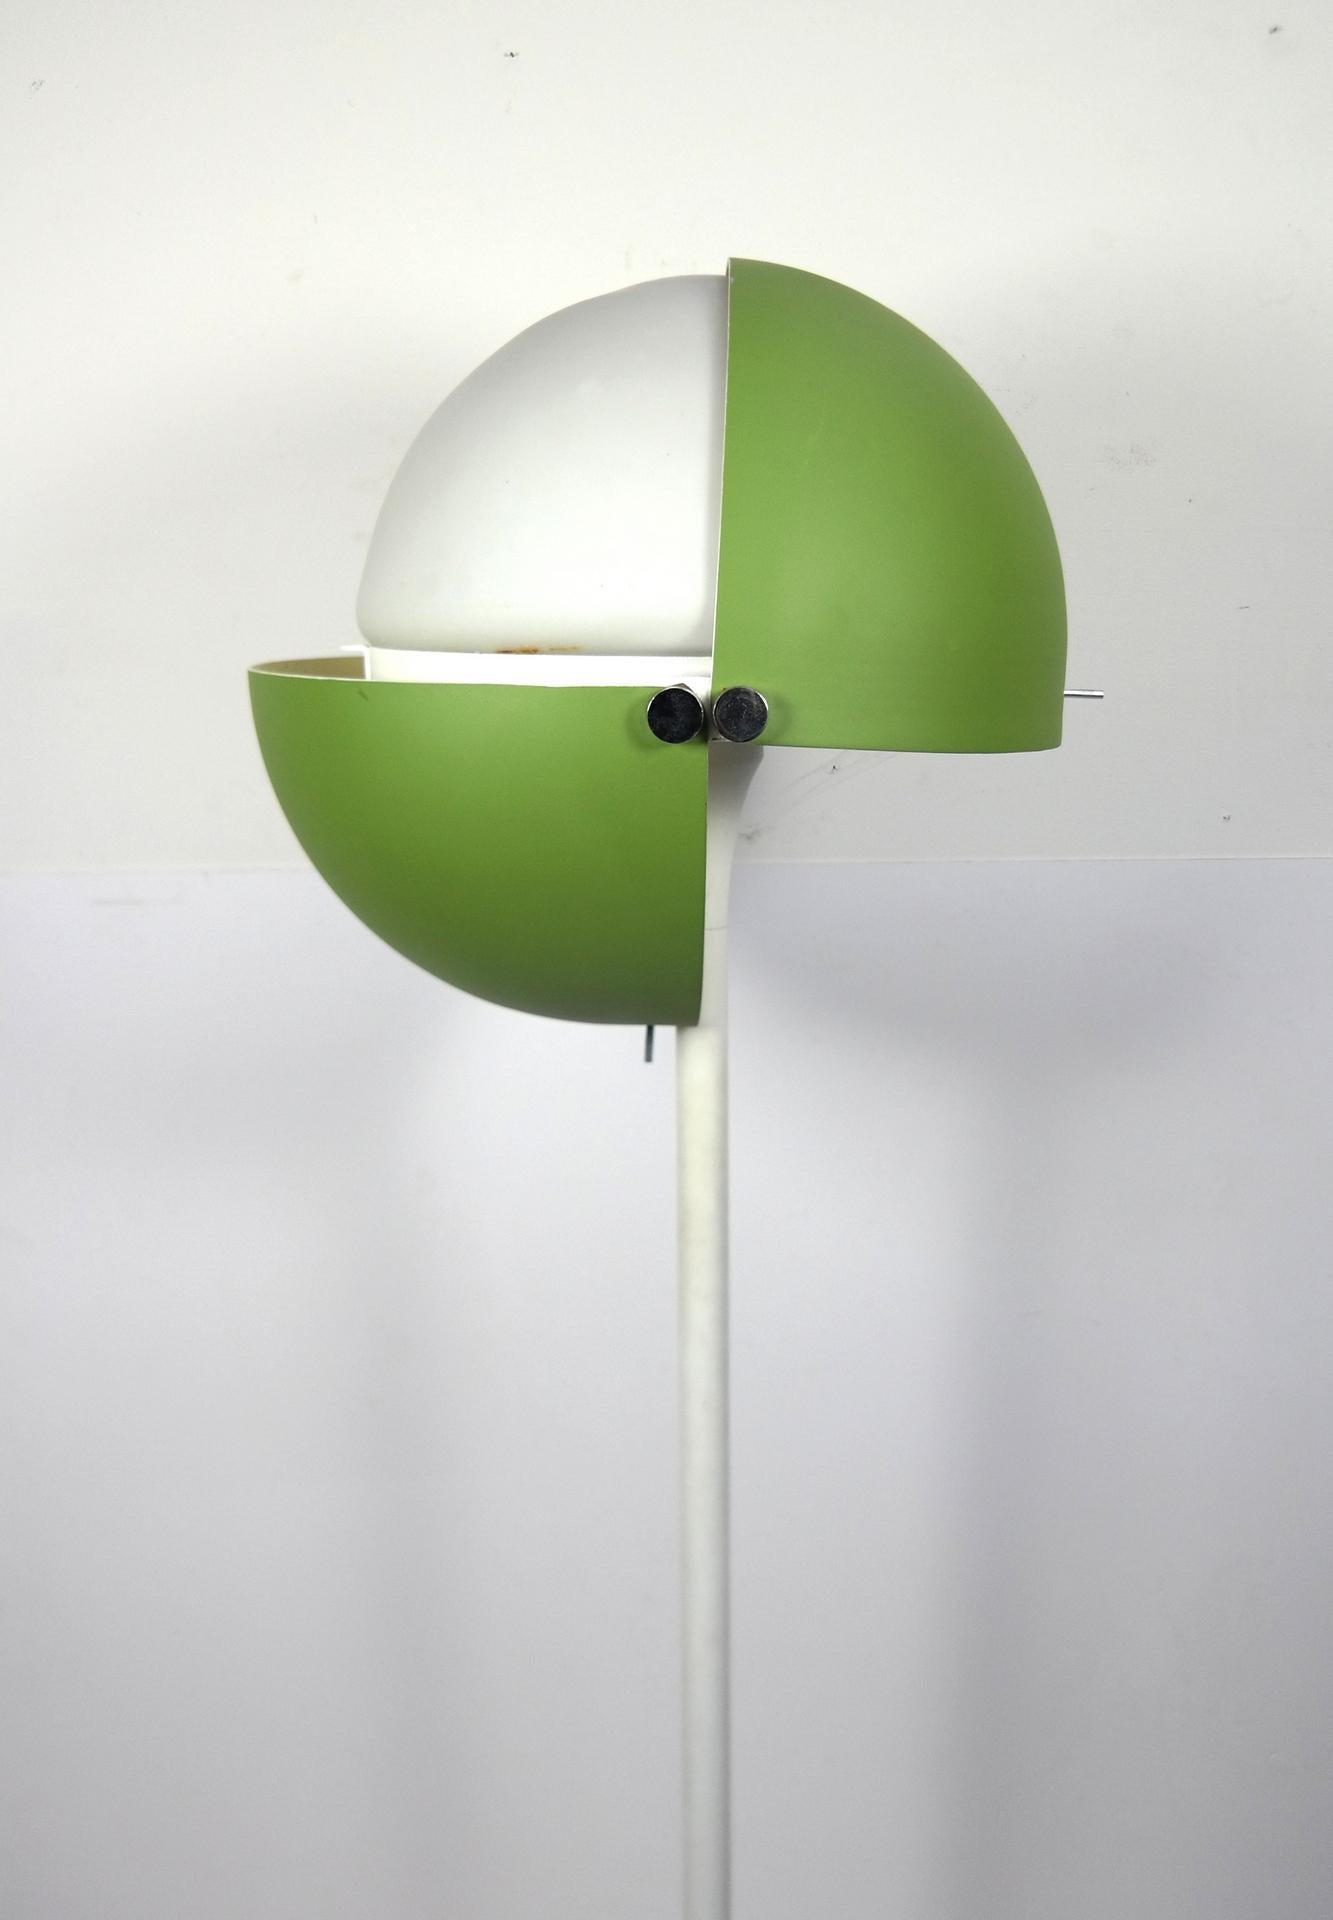 Sixties standing lamp, with a closeable steel top, painted metallic green, and a glass shade, electronically restored. As shown on the photos, in the originally vintage exhibition catalouge it was first exhibited in 1974.